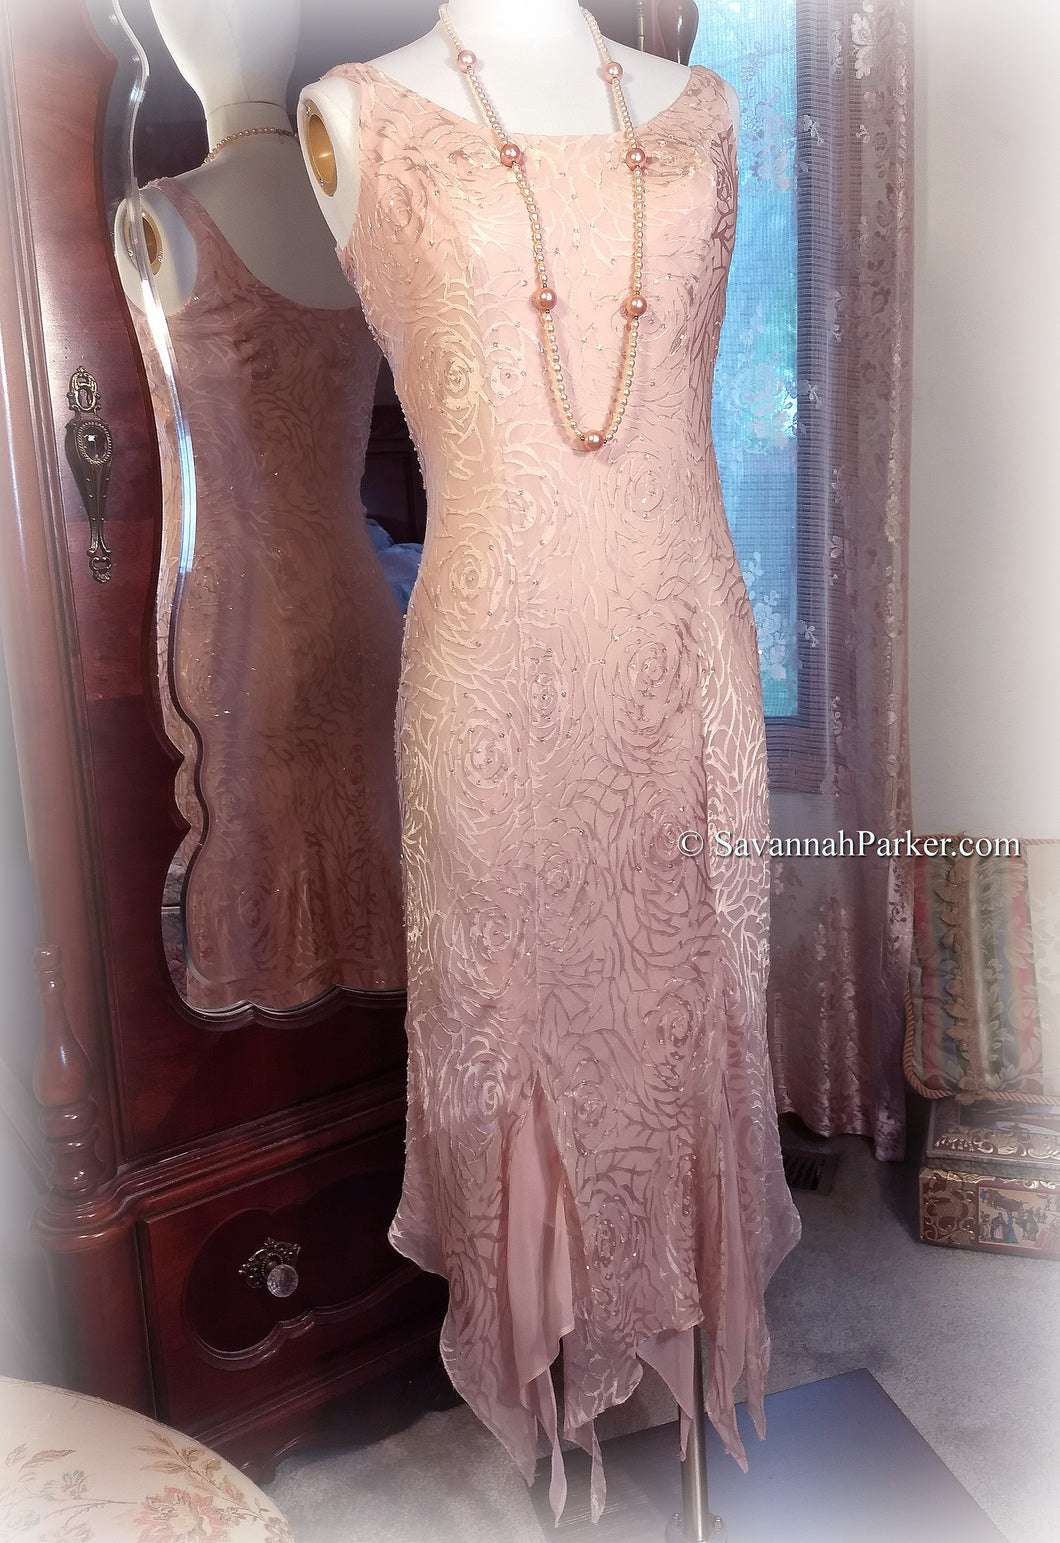 SOLD Fabulous Vintage Marilyn Style - Pink Silk Hollywood Goddess Dress - 90s does Deco - Beaded and Sequined - Handkerchief Hem